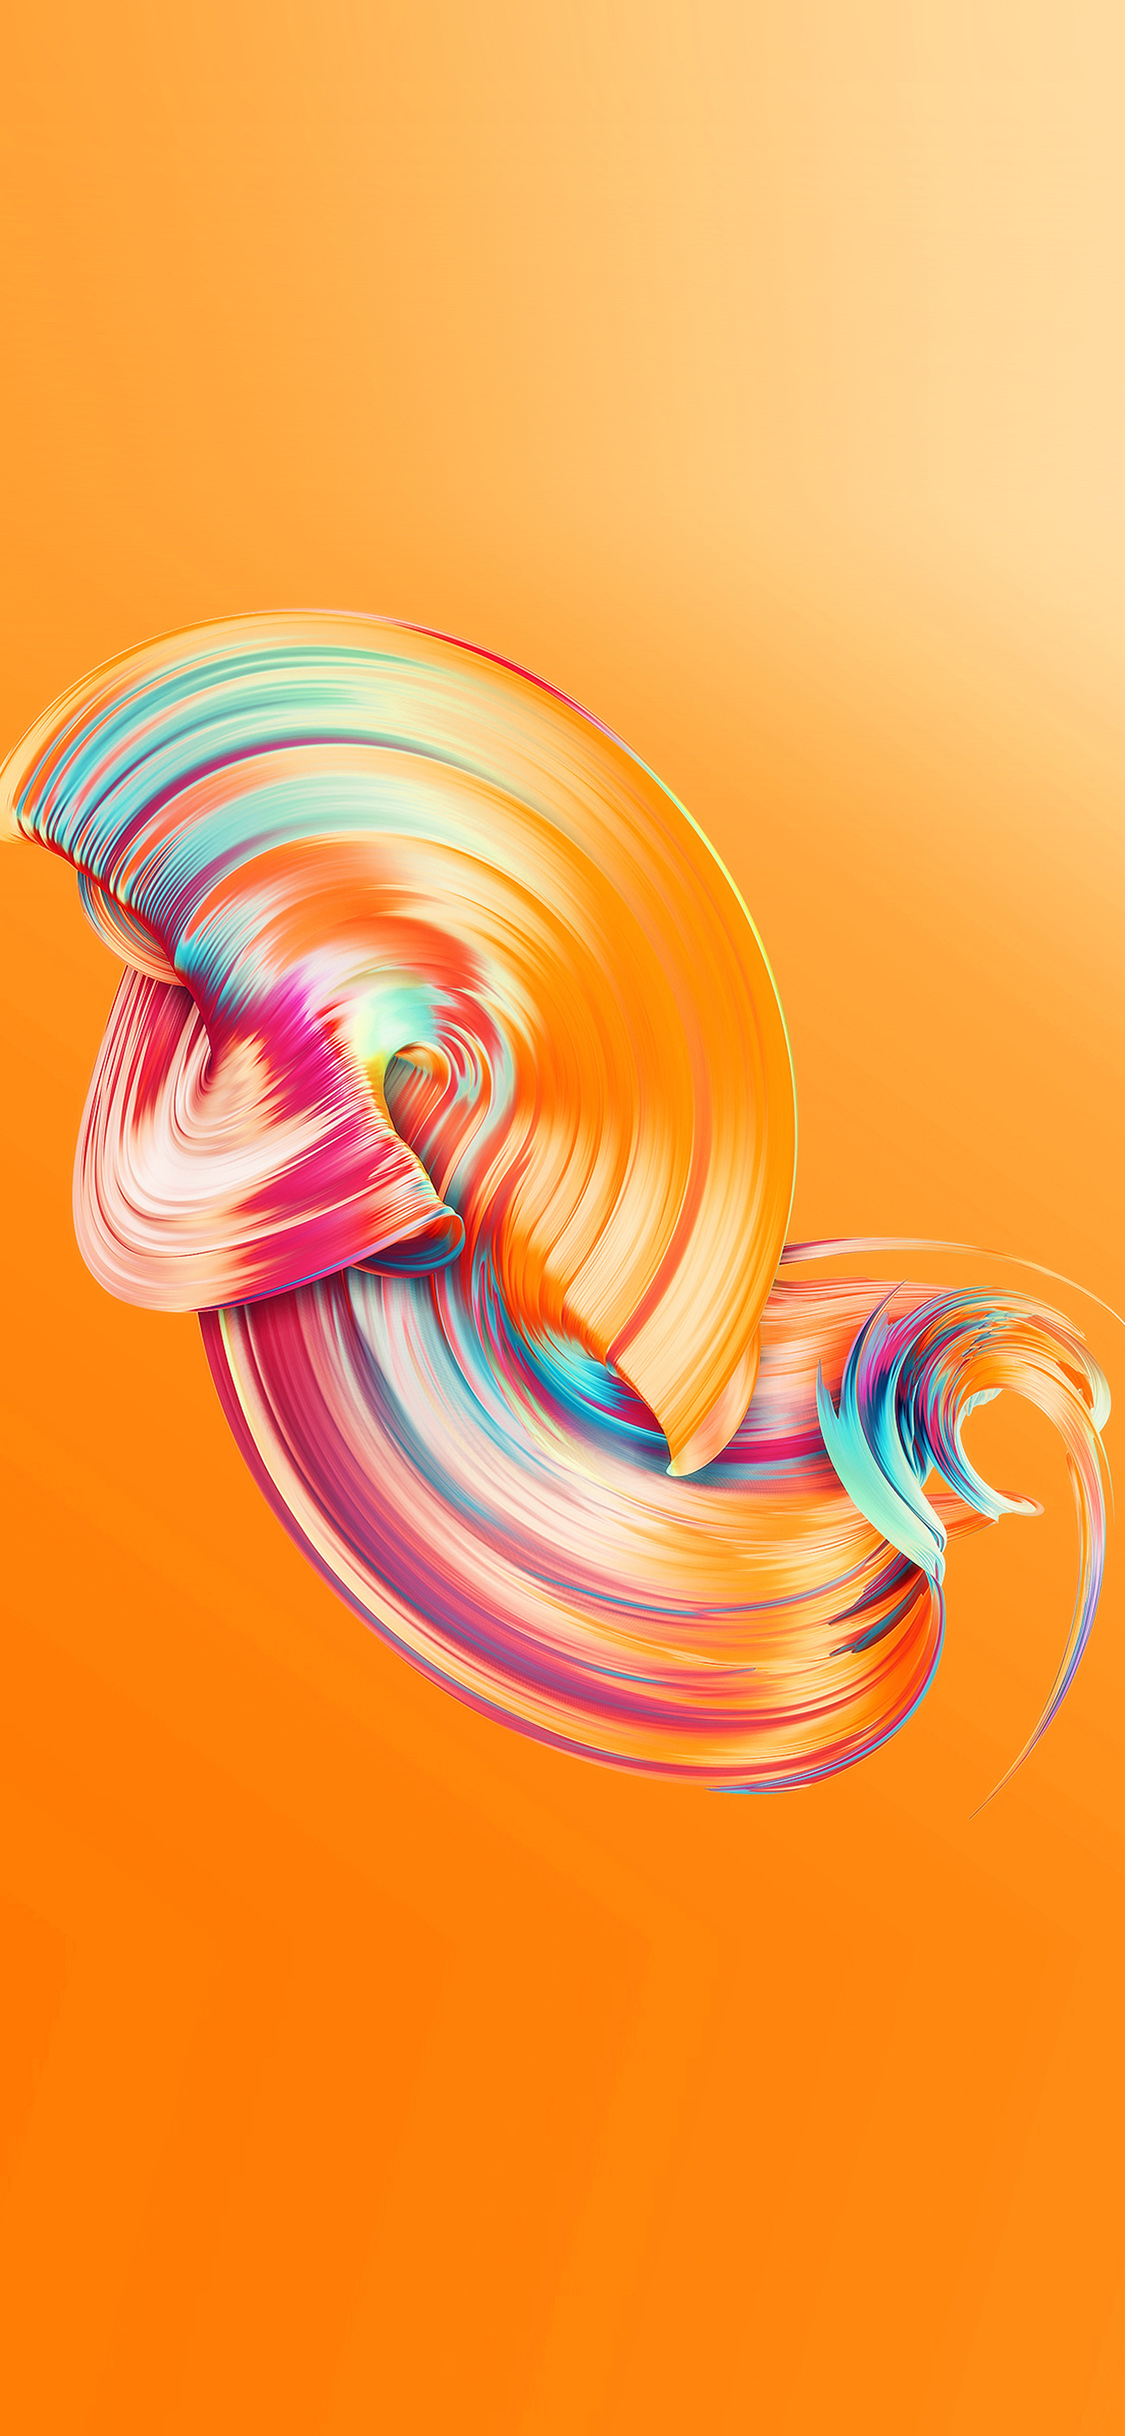 iPhone X wallpaper. abstract lines color orange pattern background